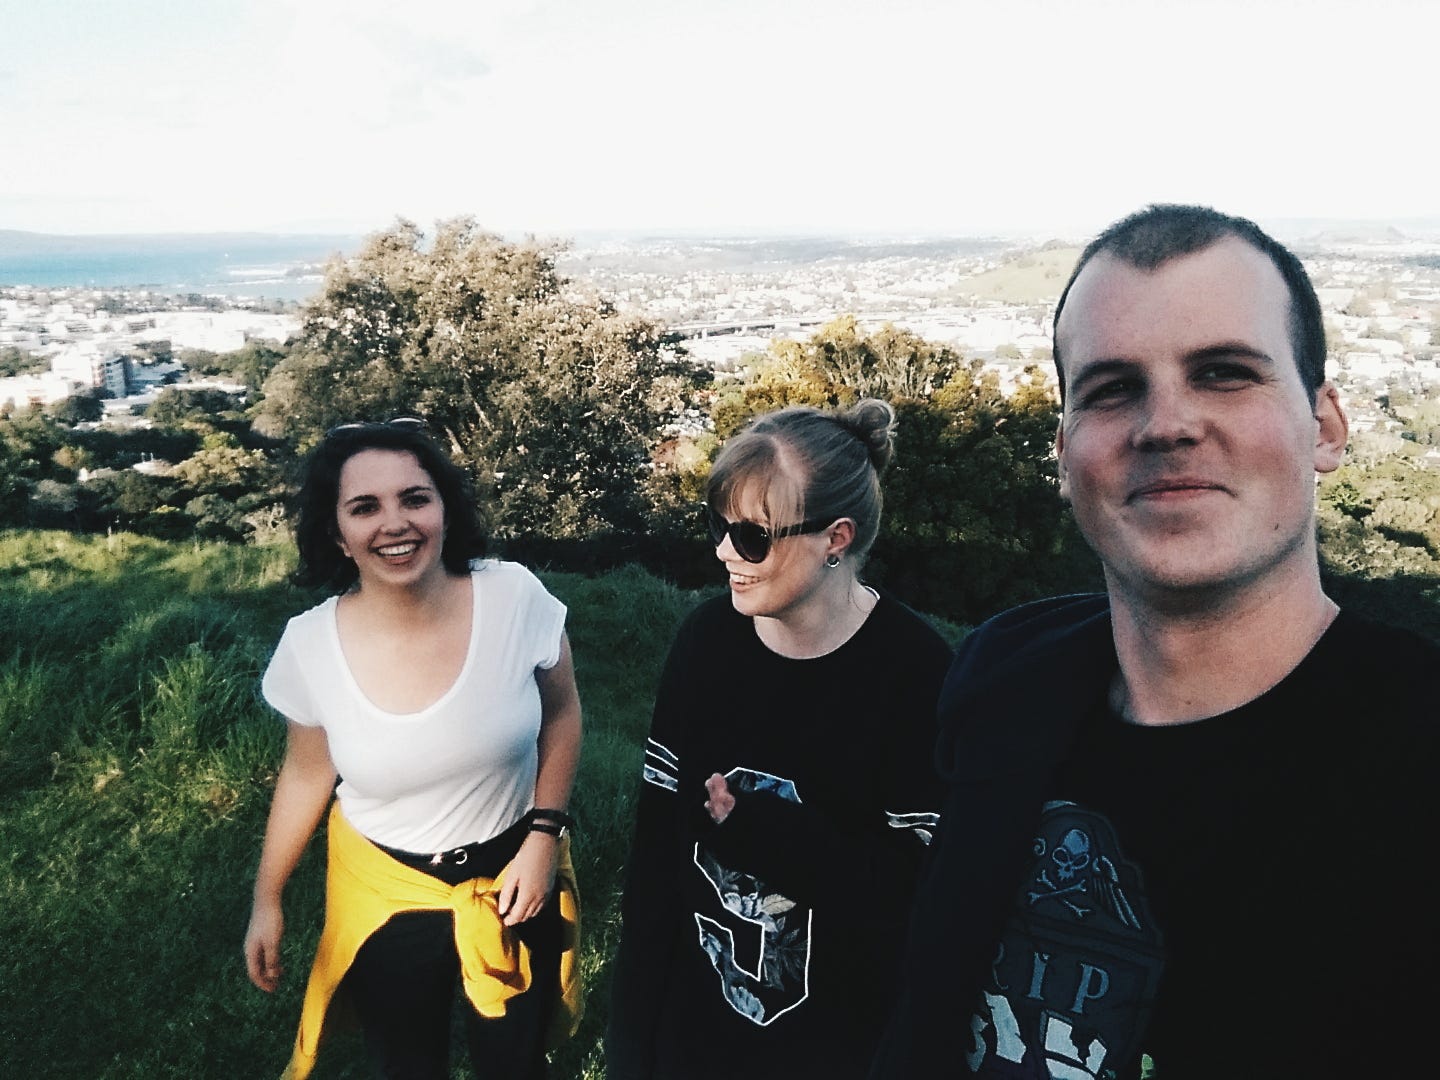 A selfie that Lachie is taking, mid-way up Mt Eden, looking out across Auckland. Louise is on the left, Chelsea in the middle, and Lachie on the right. Louise and Lachie are looking at the camera, while Chelsea is looking left. They're all smiling and laughing. 